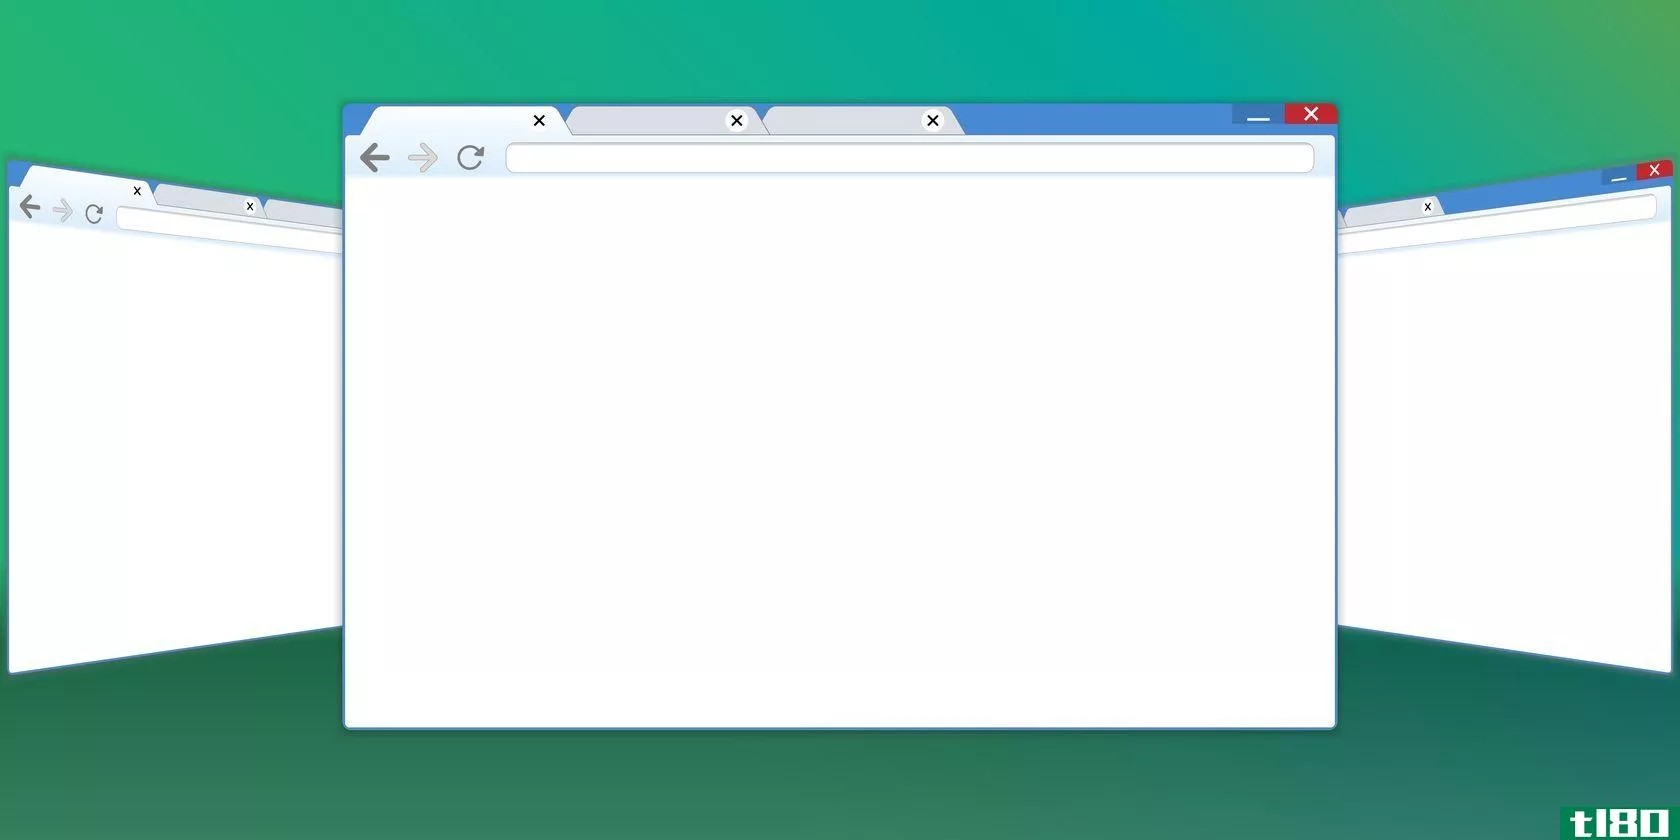 A browser with tabs in different profiles